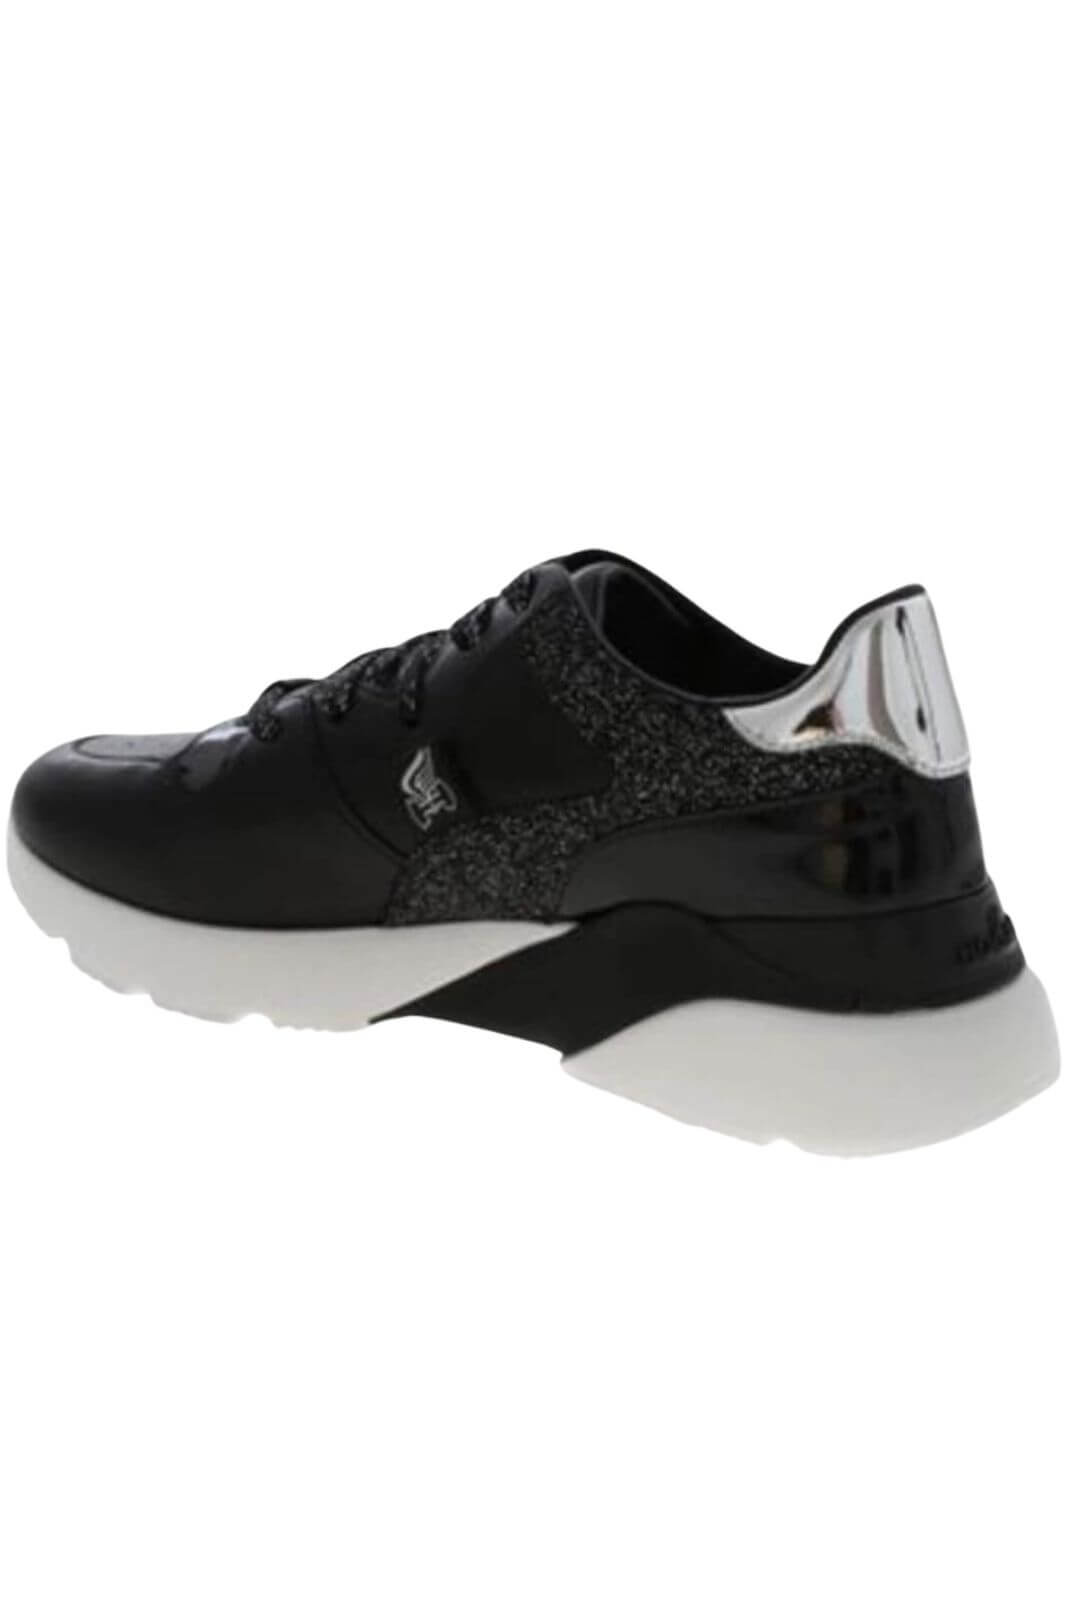 Hogan Sneakers Donna H385 SPORT STYLE